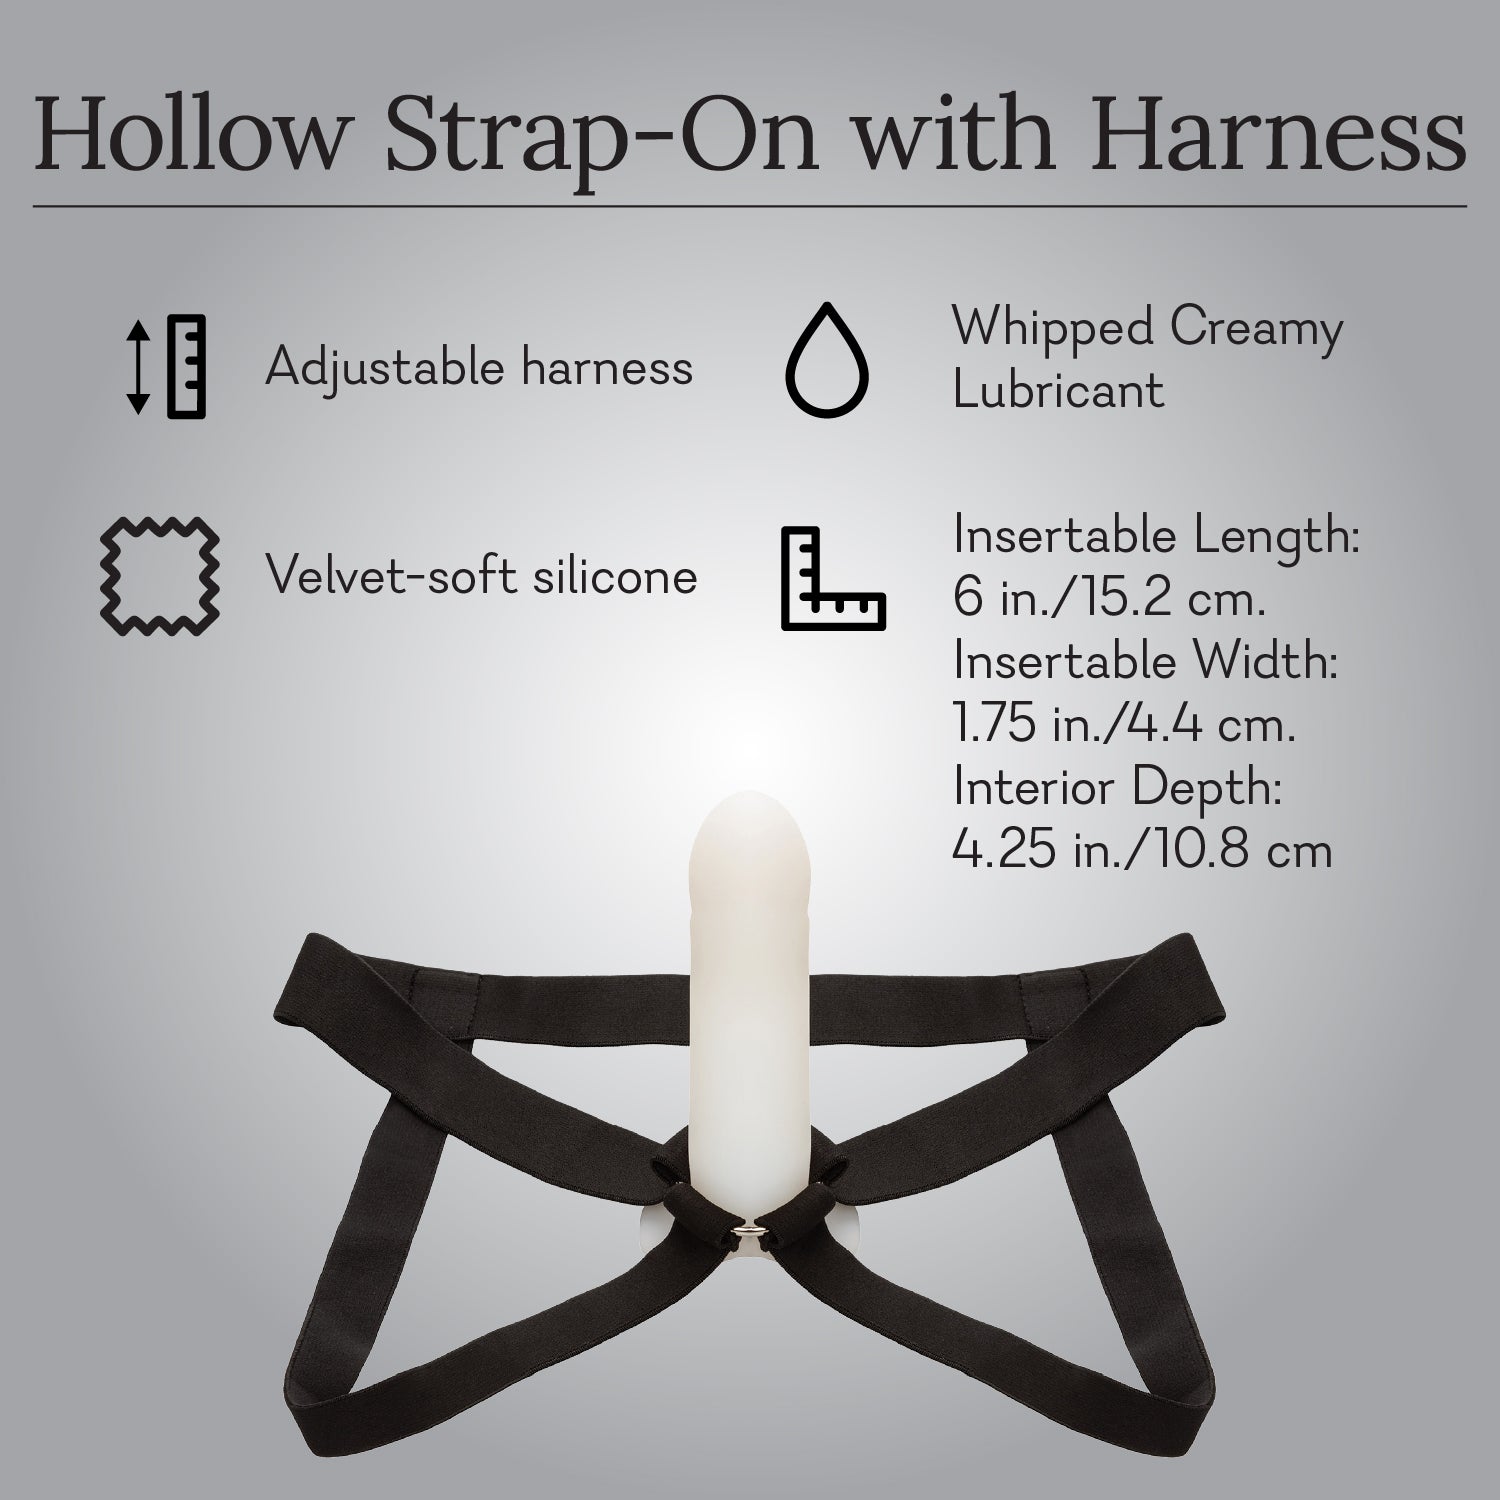 Hollow Strap-On with Harness Infographic 2 Pure Romance